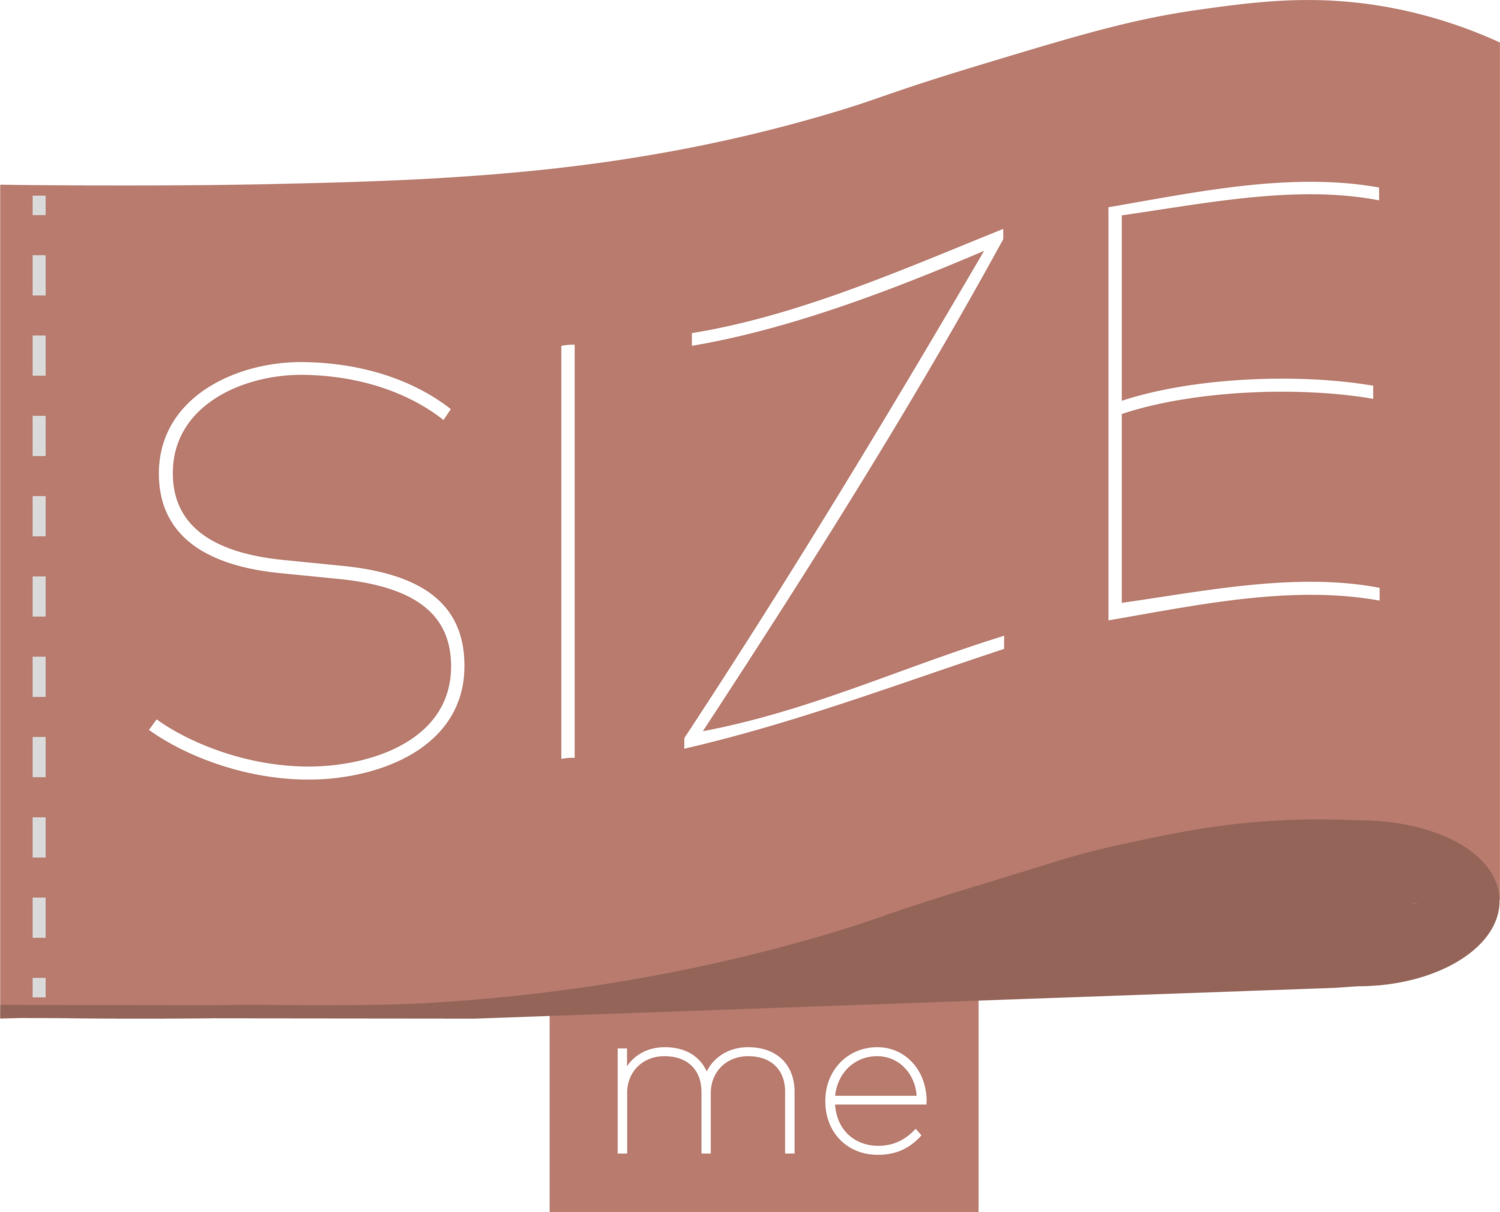 SIZE:me patterns printed at 25% discount